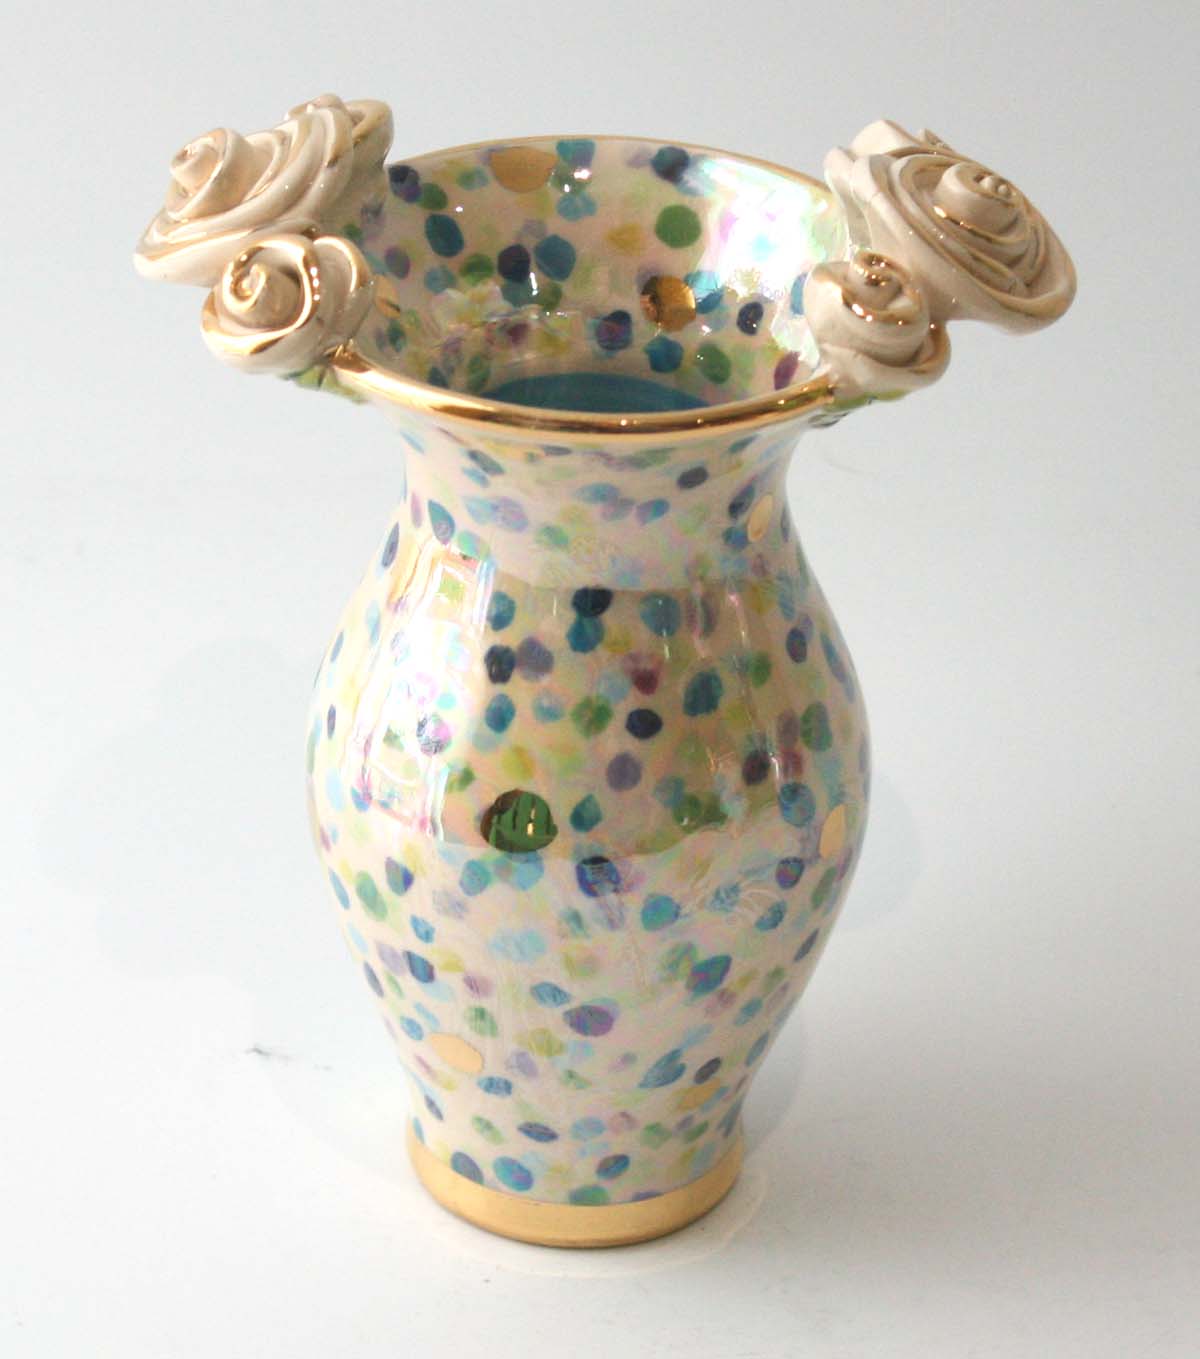 Tiny Rose Edged Vase in Blue Confetti - MaryRoseYoung